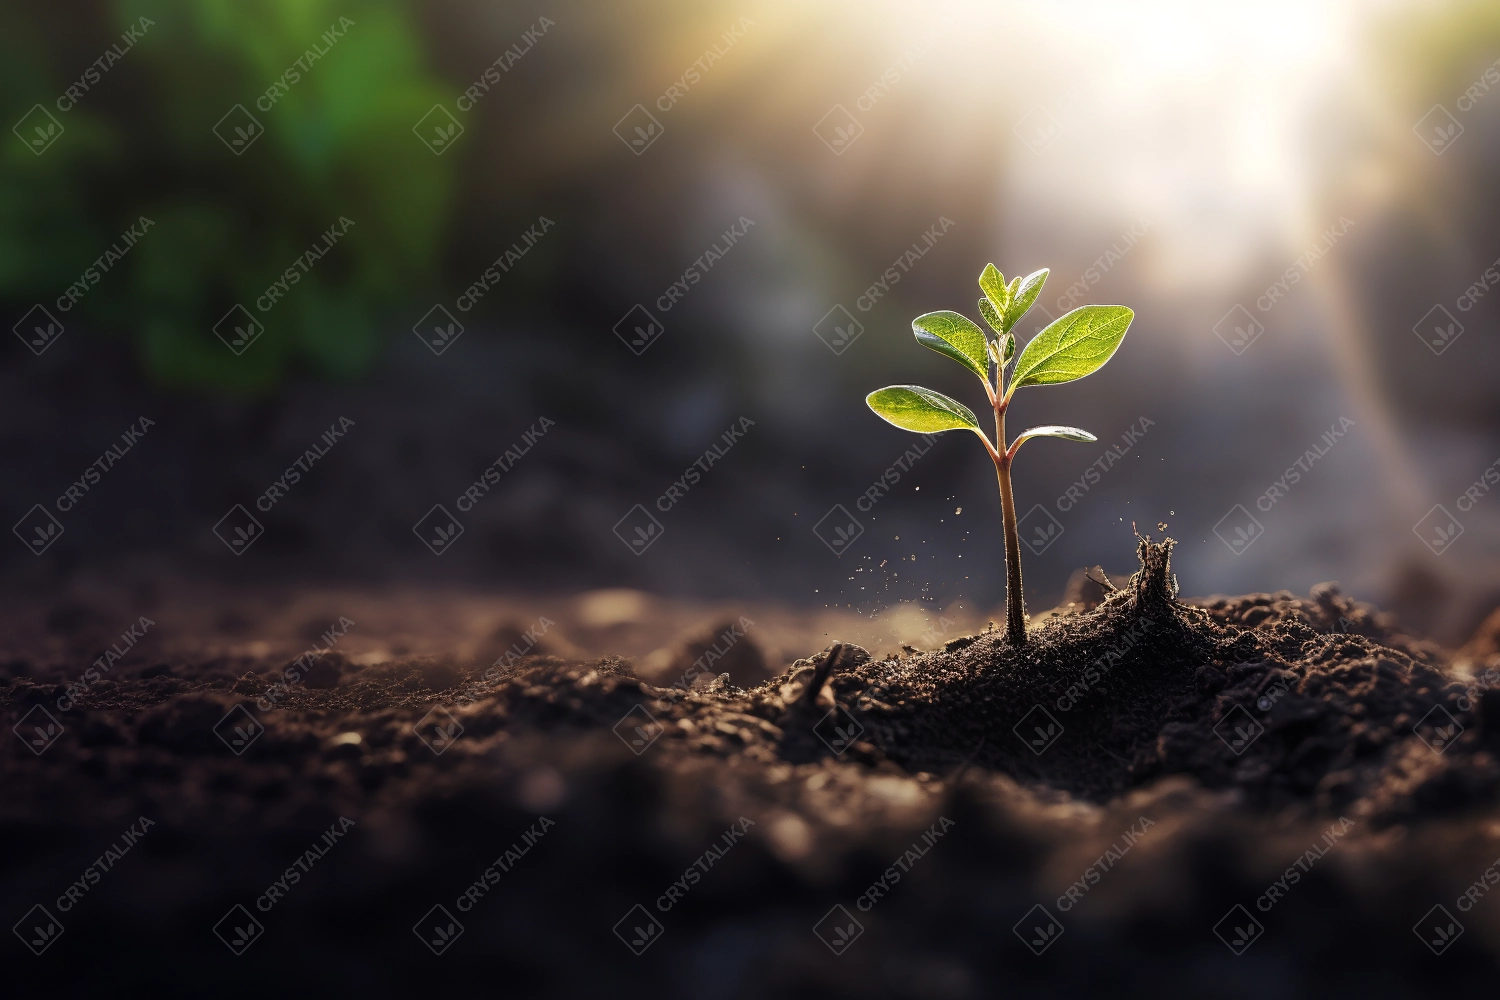 A sapling sprouting from the ground. Green seedling illustrating concept beginning of new life.